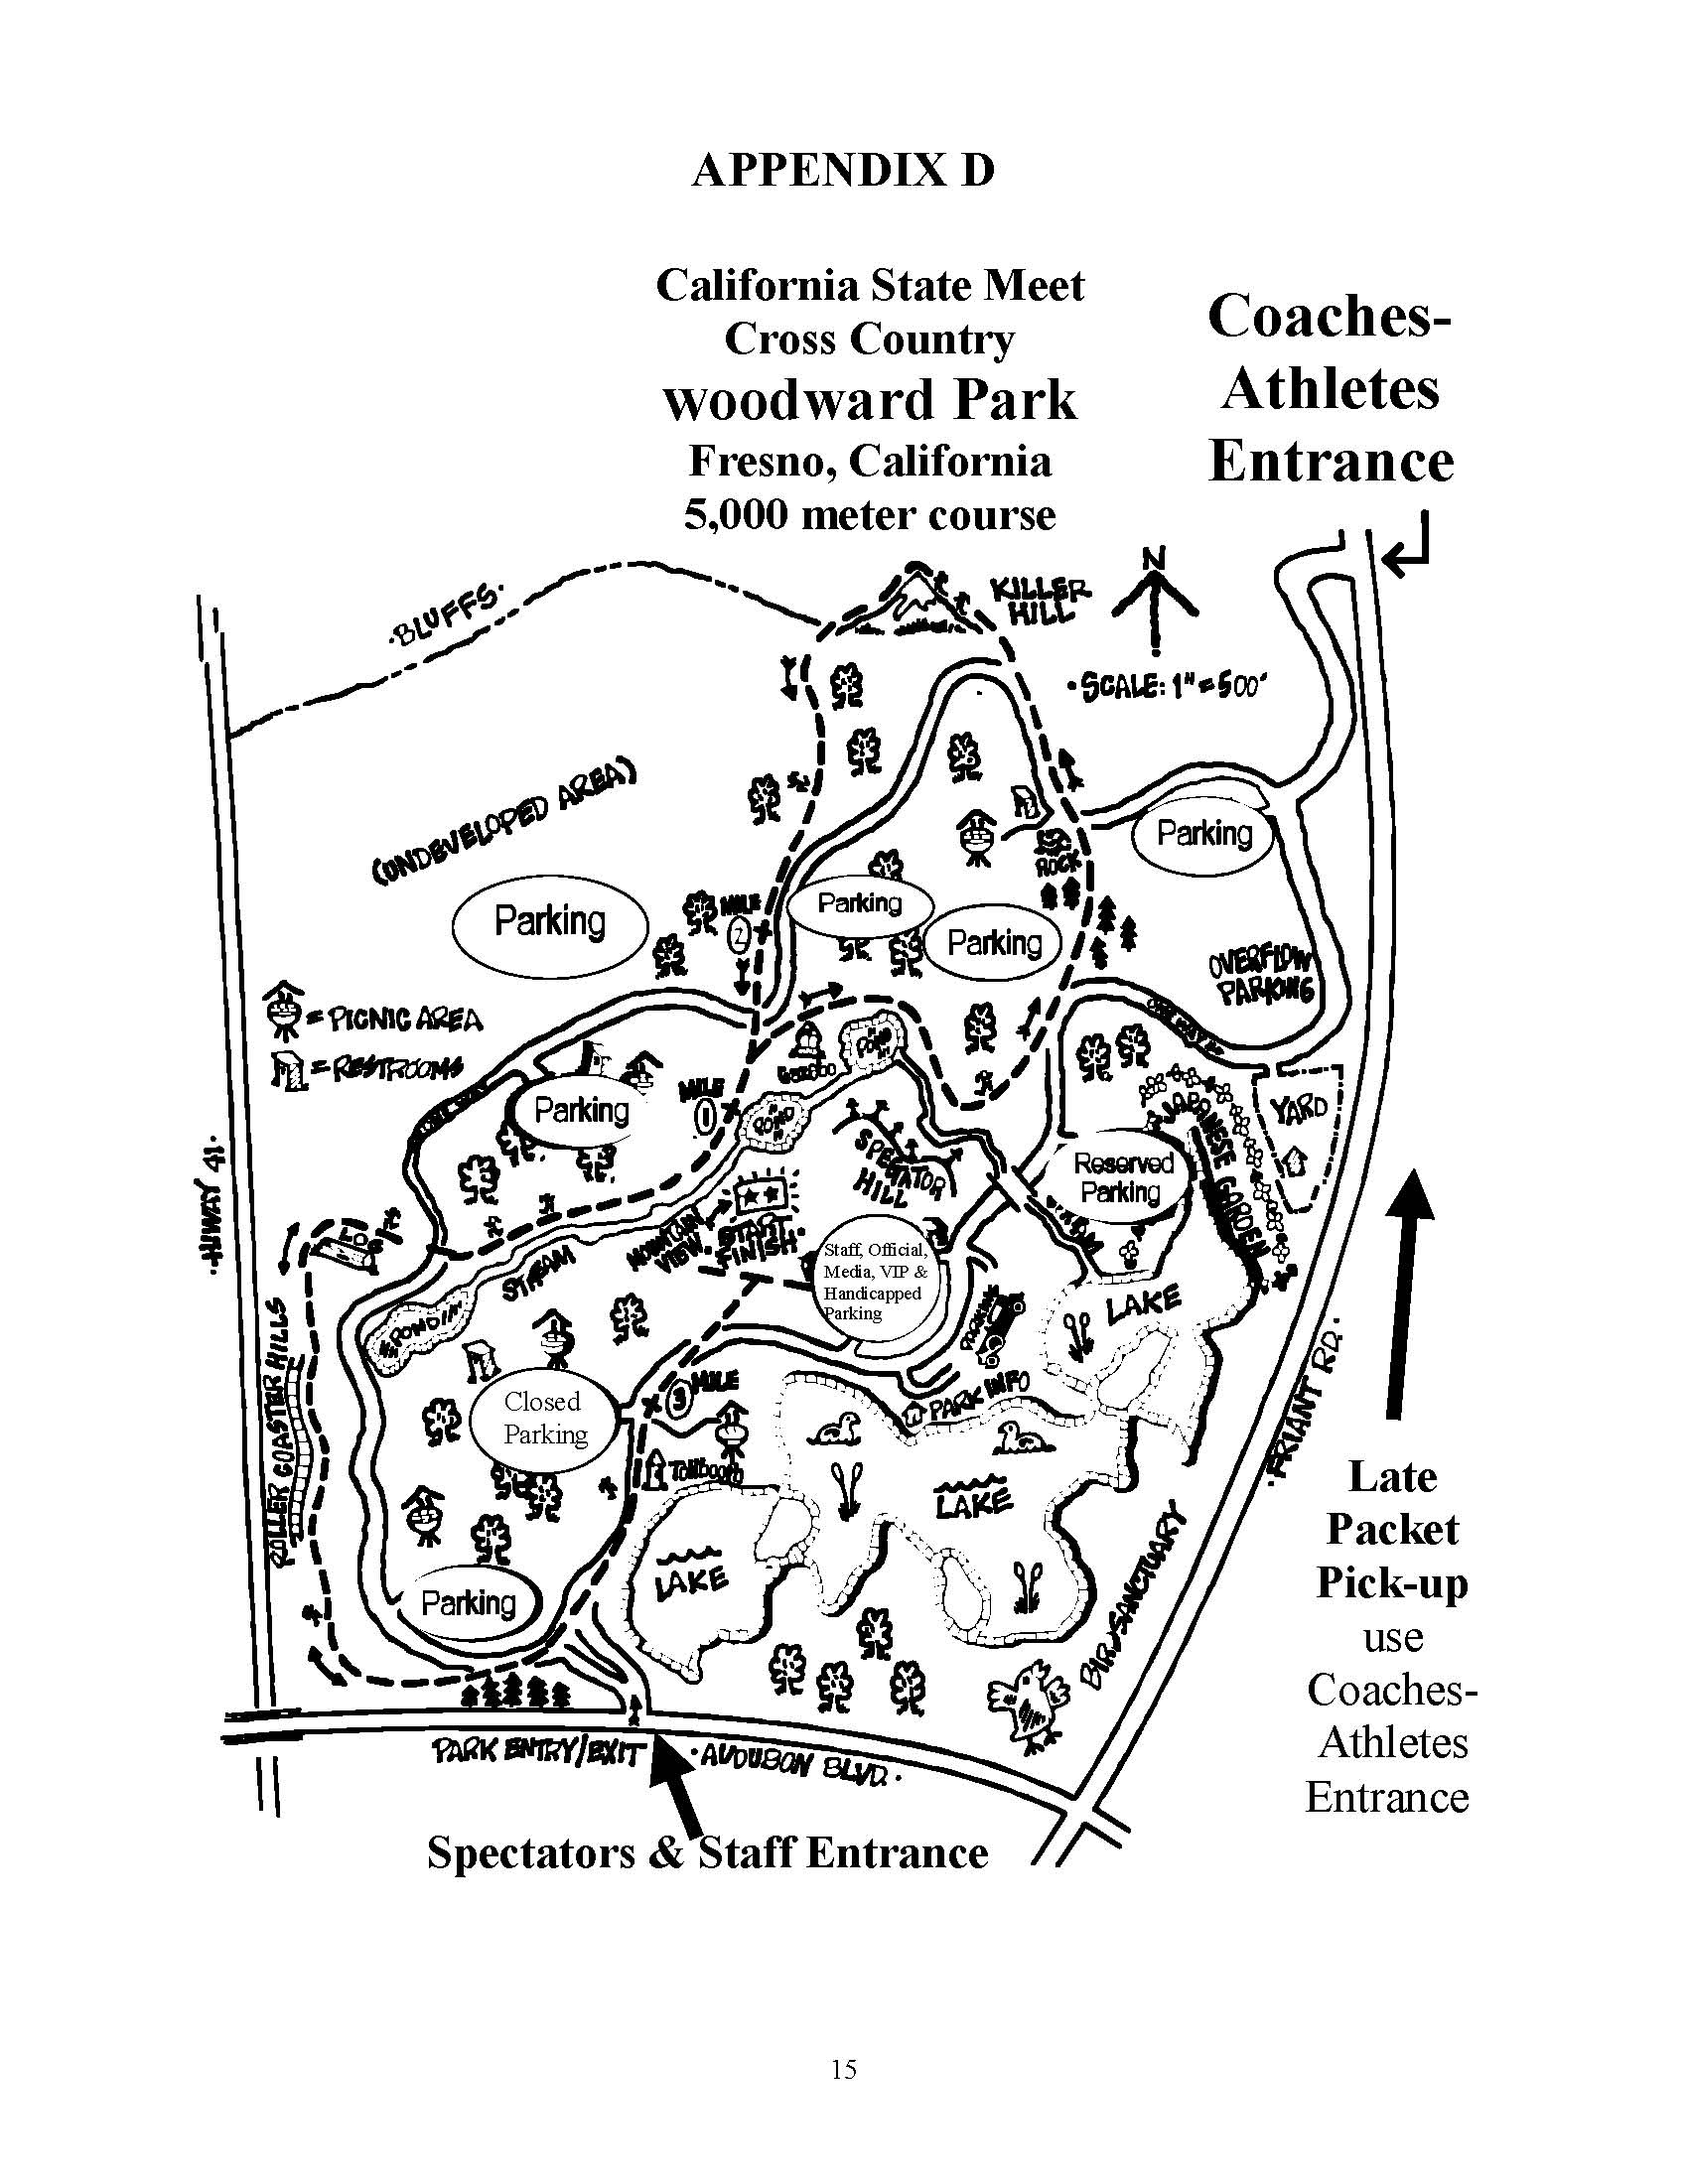 Woodward Park (course map - drawing)